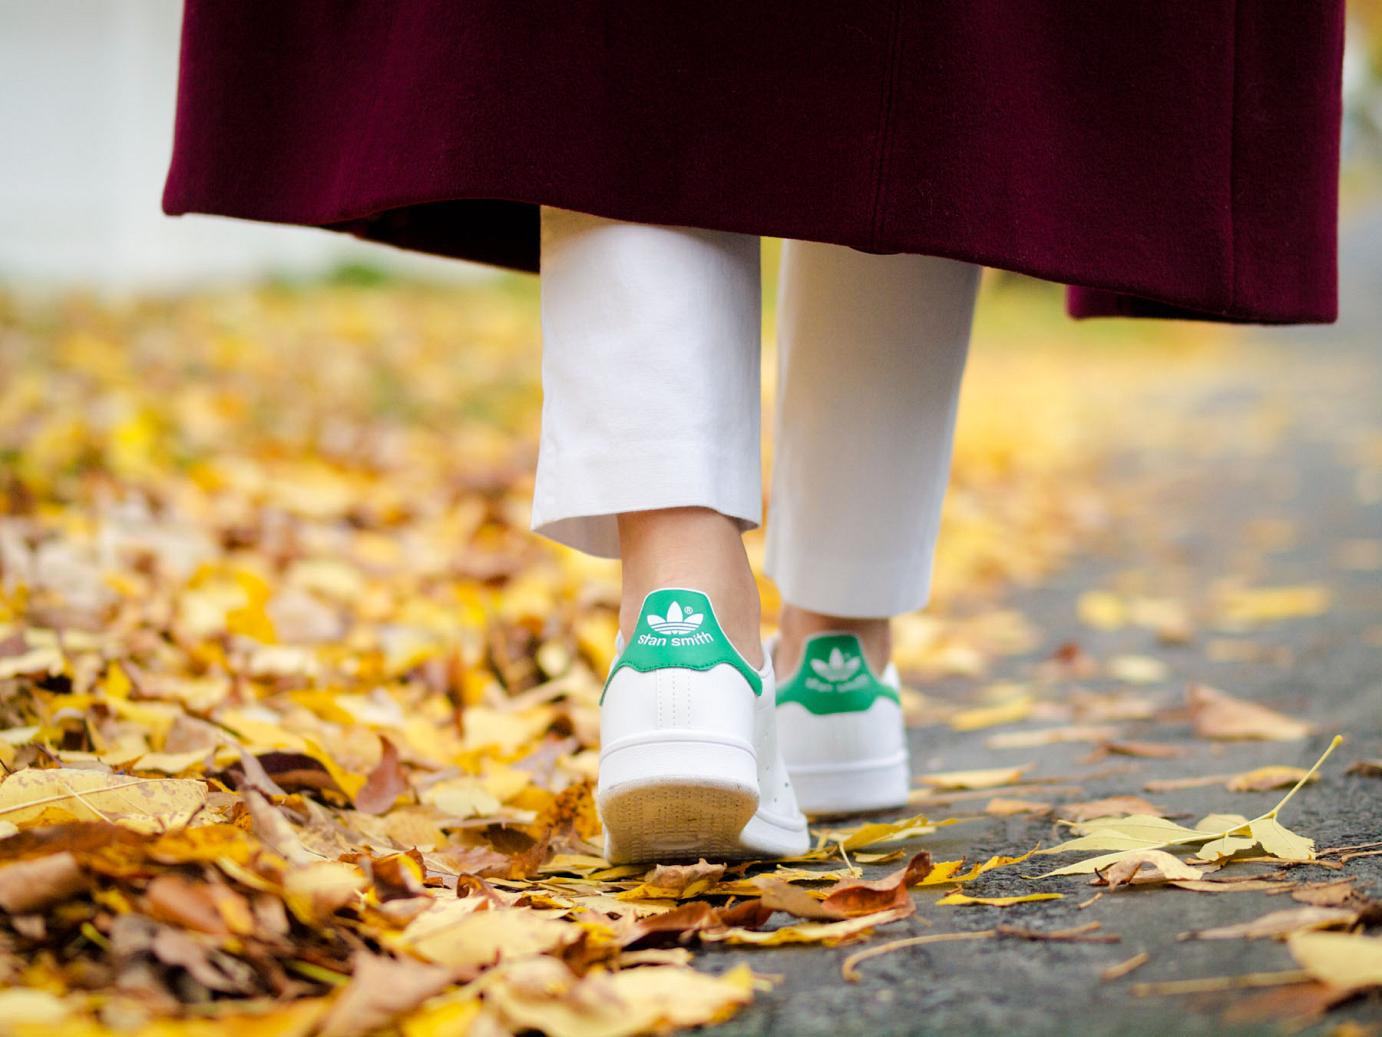 bittersweet colours, fall colors, fall coats, fall trends, burgundy coat, burgundy trend, street style, maternity style, 18 weeks, white on white trend, Tommy Hilfiger, adidas, stan smith adidas, white sneakers, sneakers trend, red lips